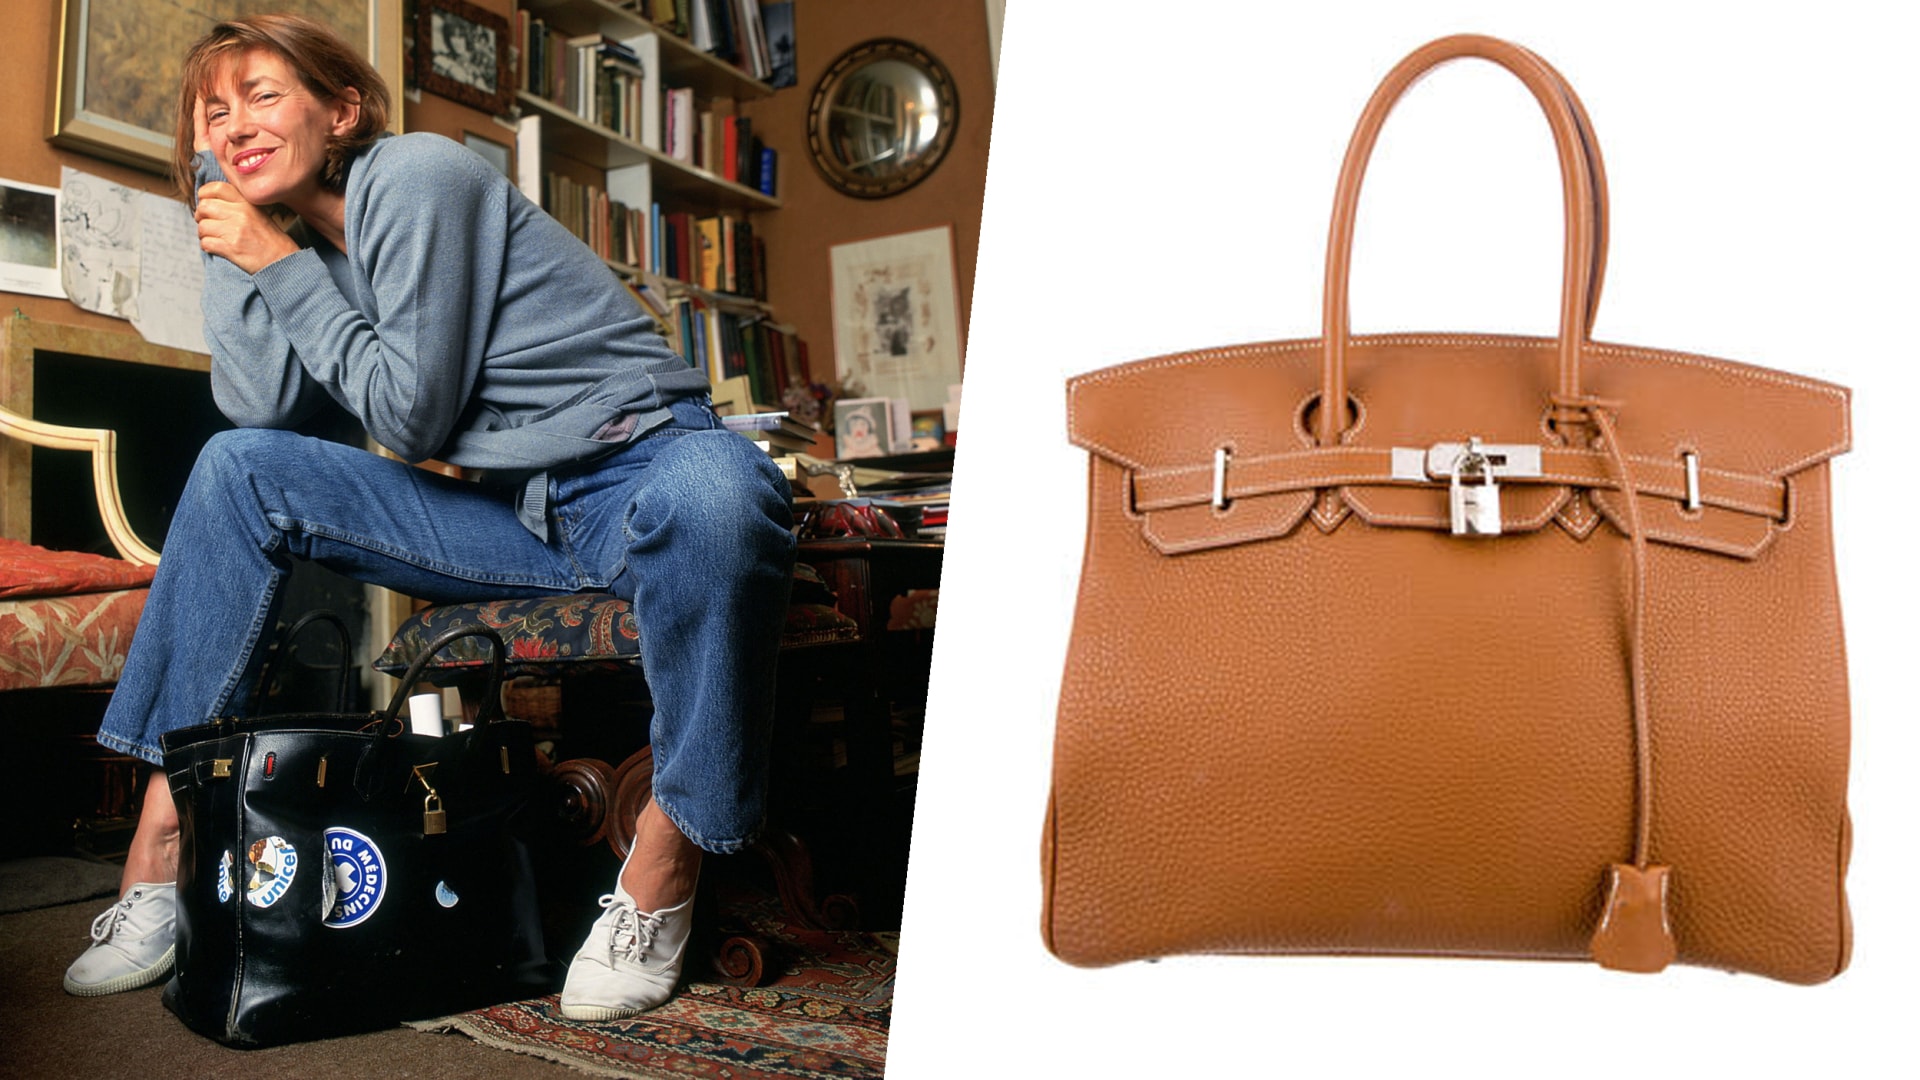 Jane Birkin, Grace Kelly and purses named after iconic women - TODAY.com